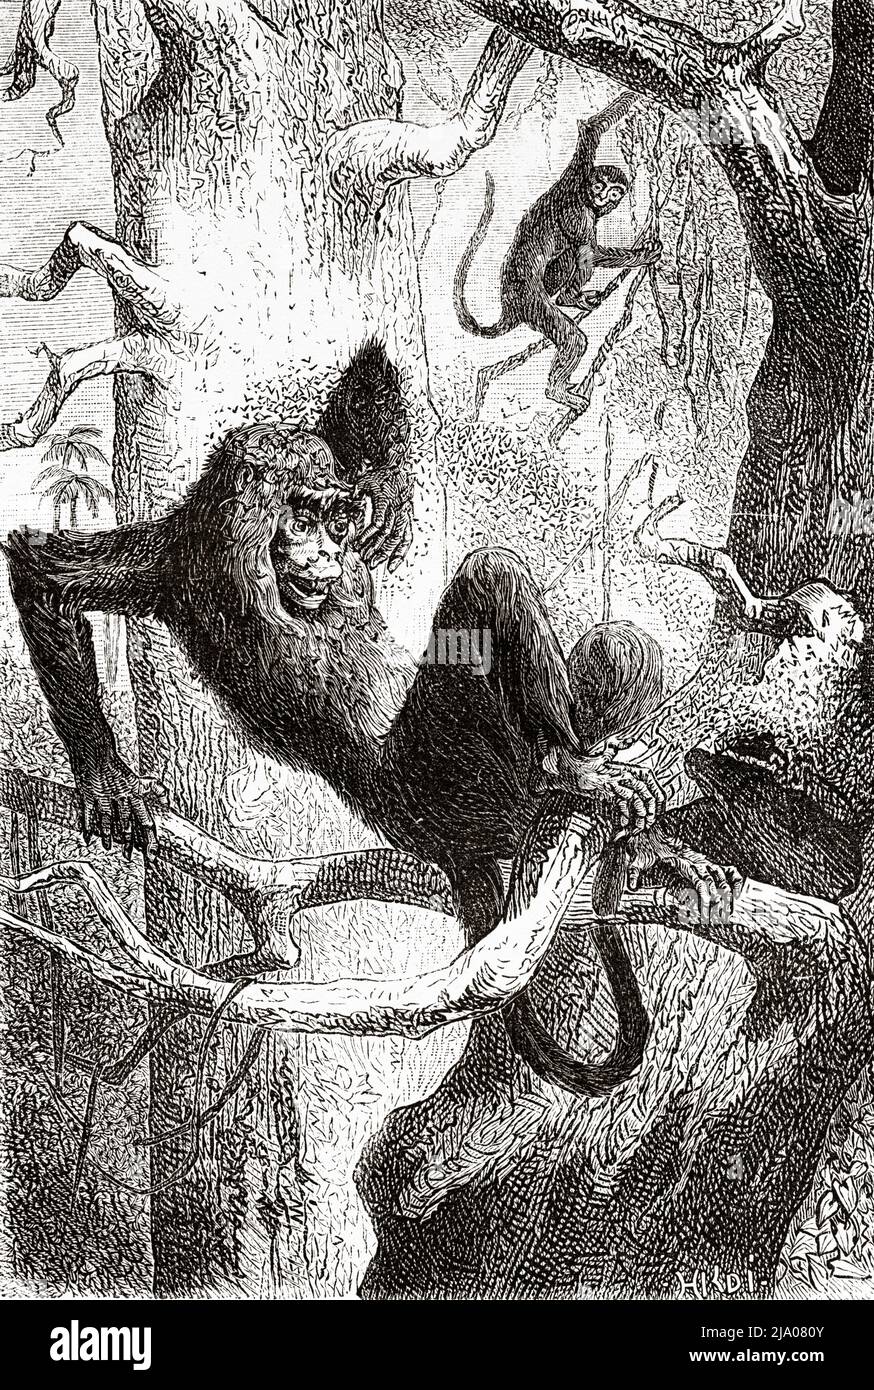 Howler monkey and macaque, French Guiana, Department of France, South America. Voyage of exploration in the interior of the Guianas 1877 by Jules Crevaux. Le Tour du Monde 1879 Stock Photo